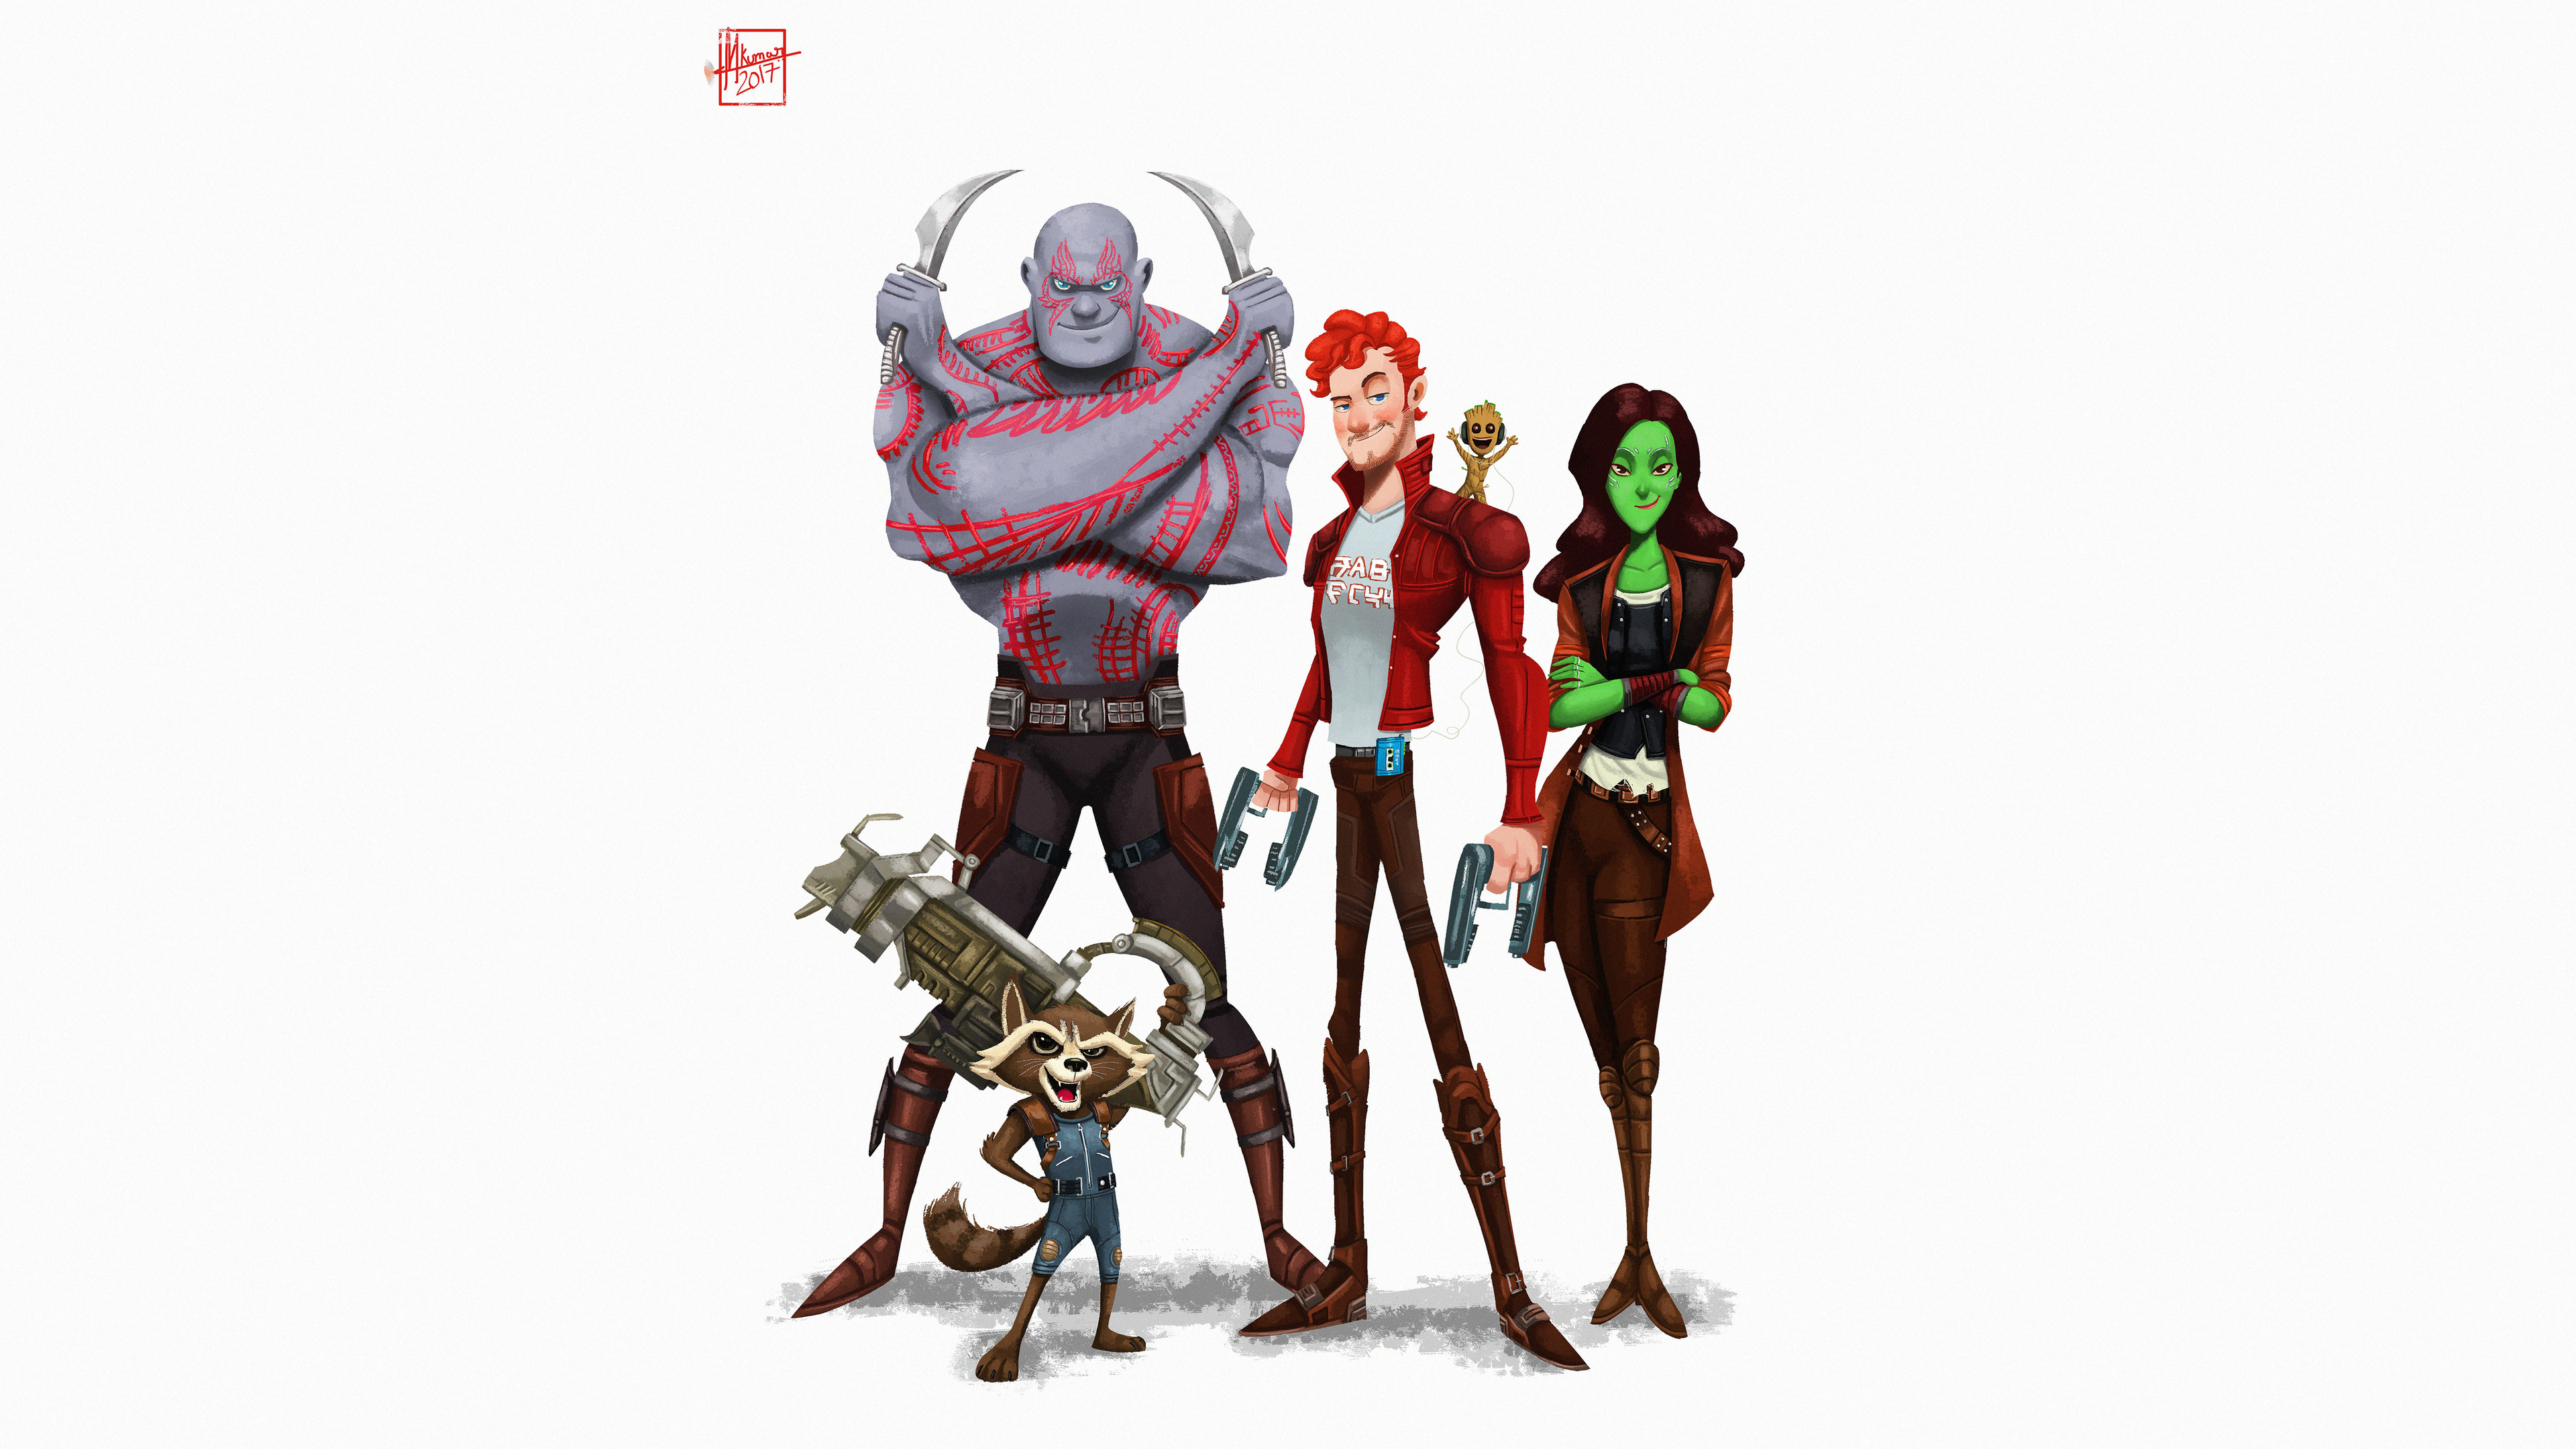 Gamora Marvel's Guardians Of The Galaxy Wallpapers